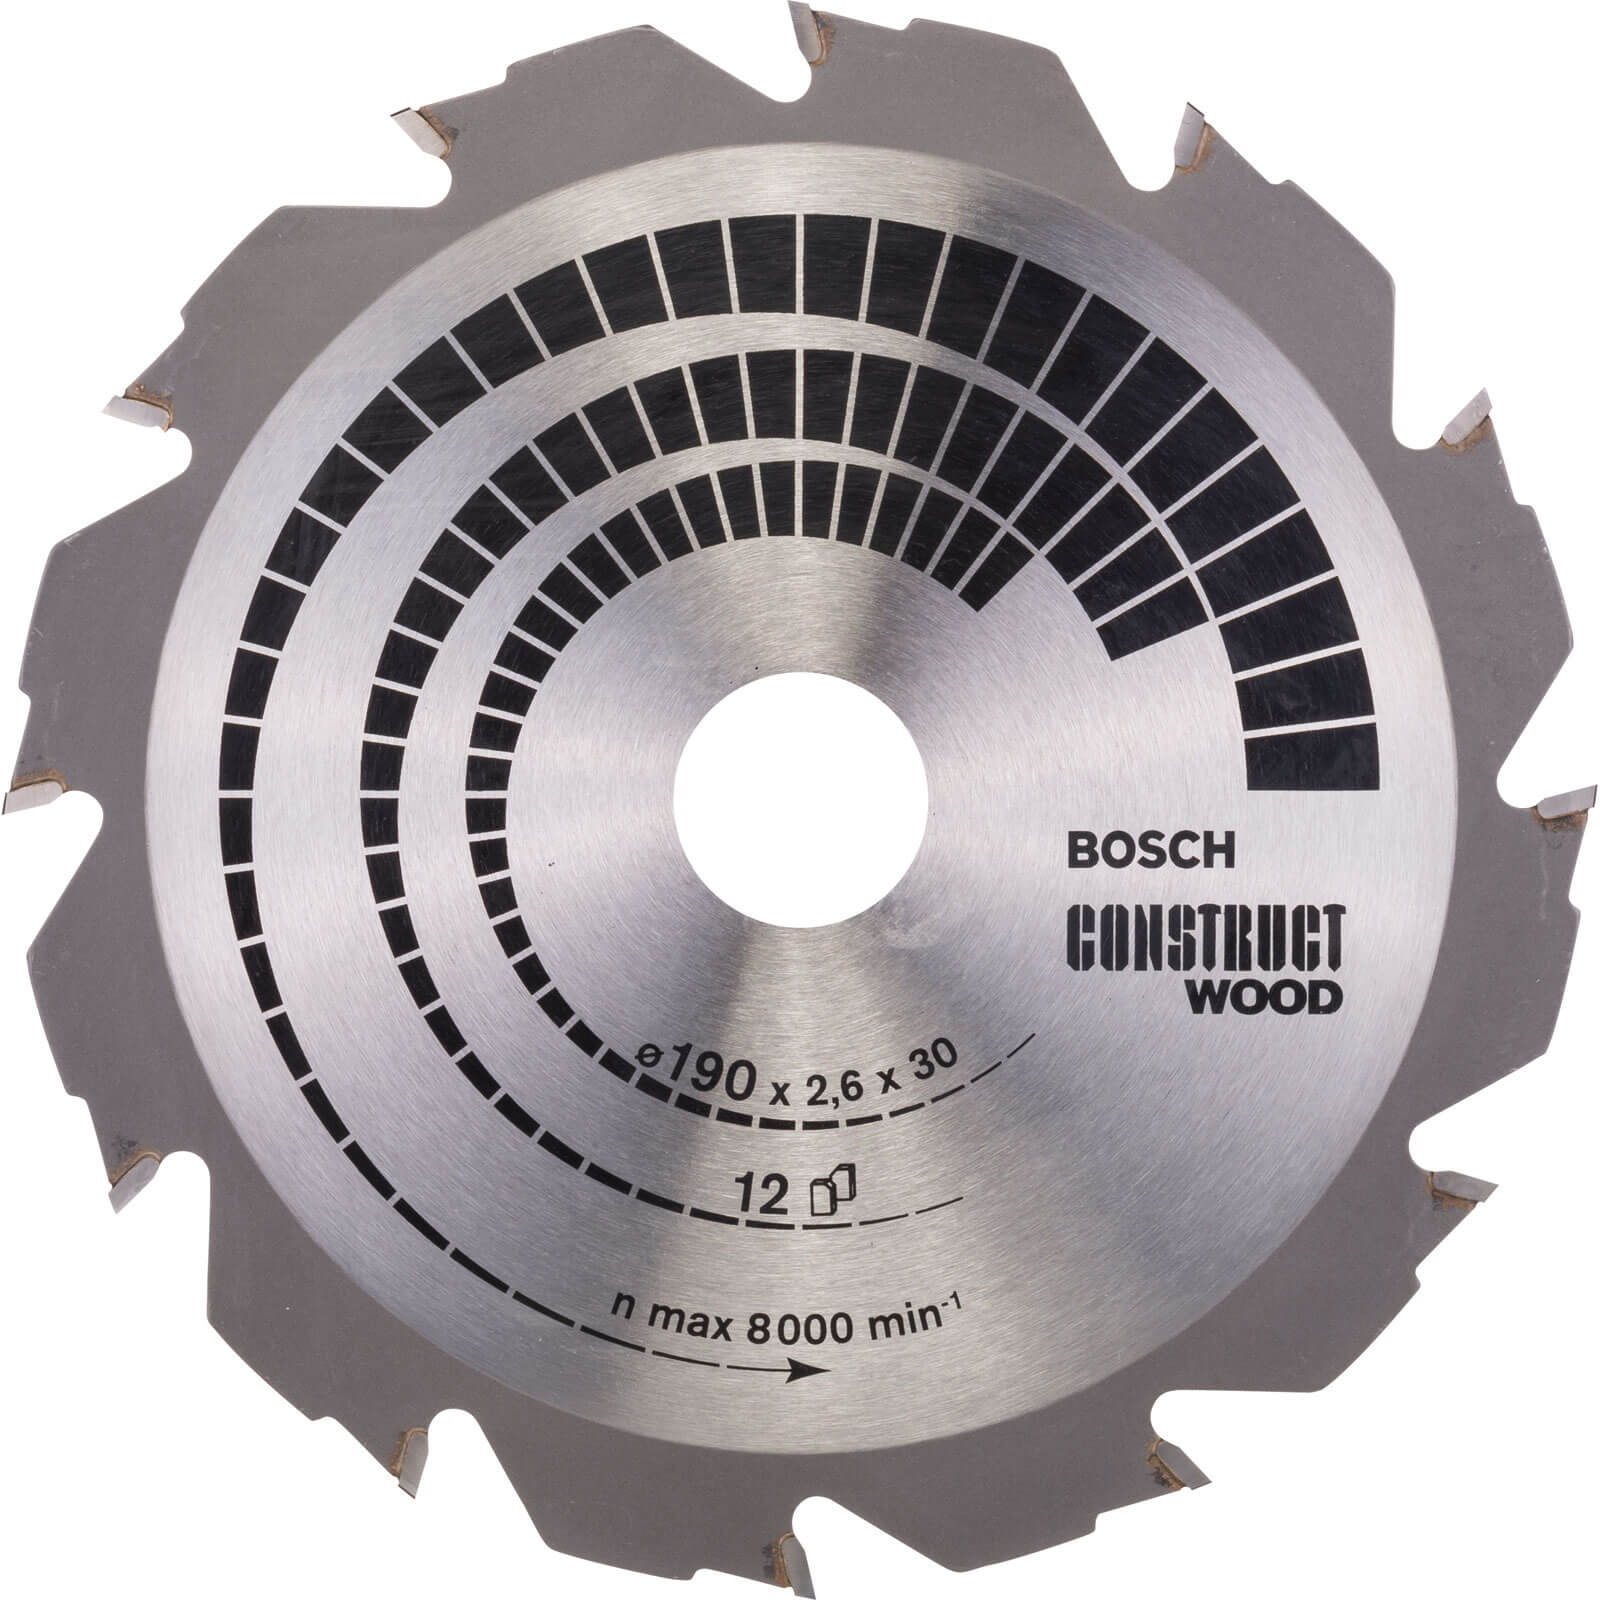 Photos - Power Tool Accessory Bosch Construct Wood Cutting Saw Blade 190mm 12T 30mm 